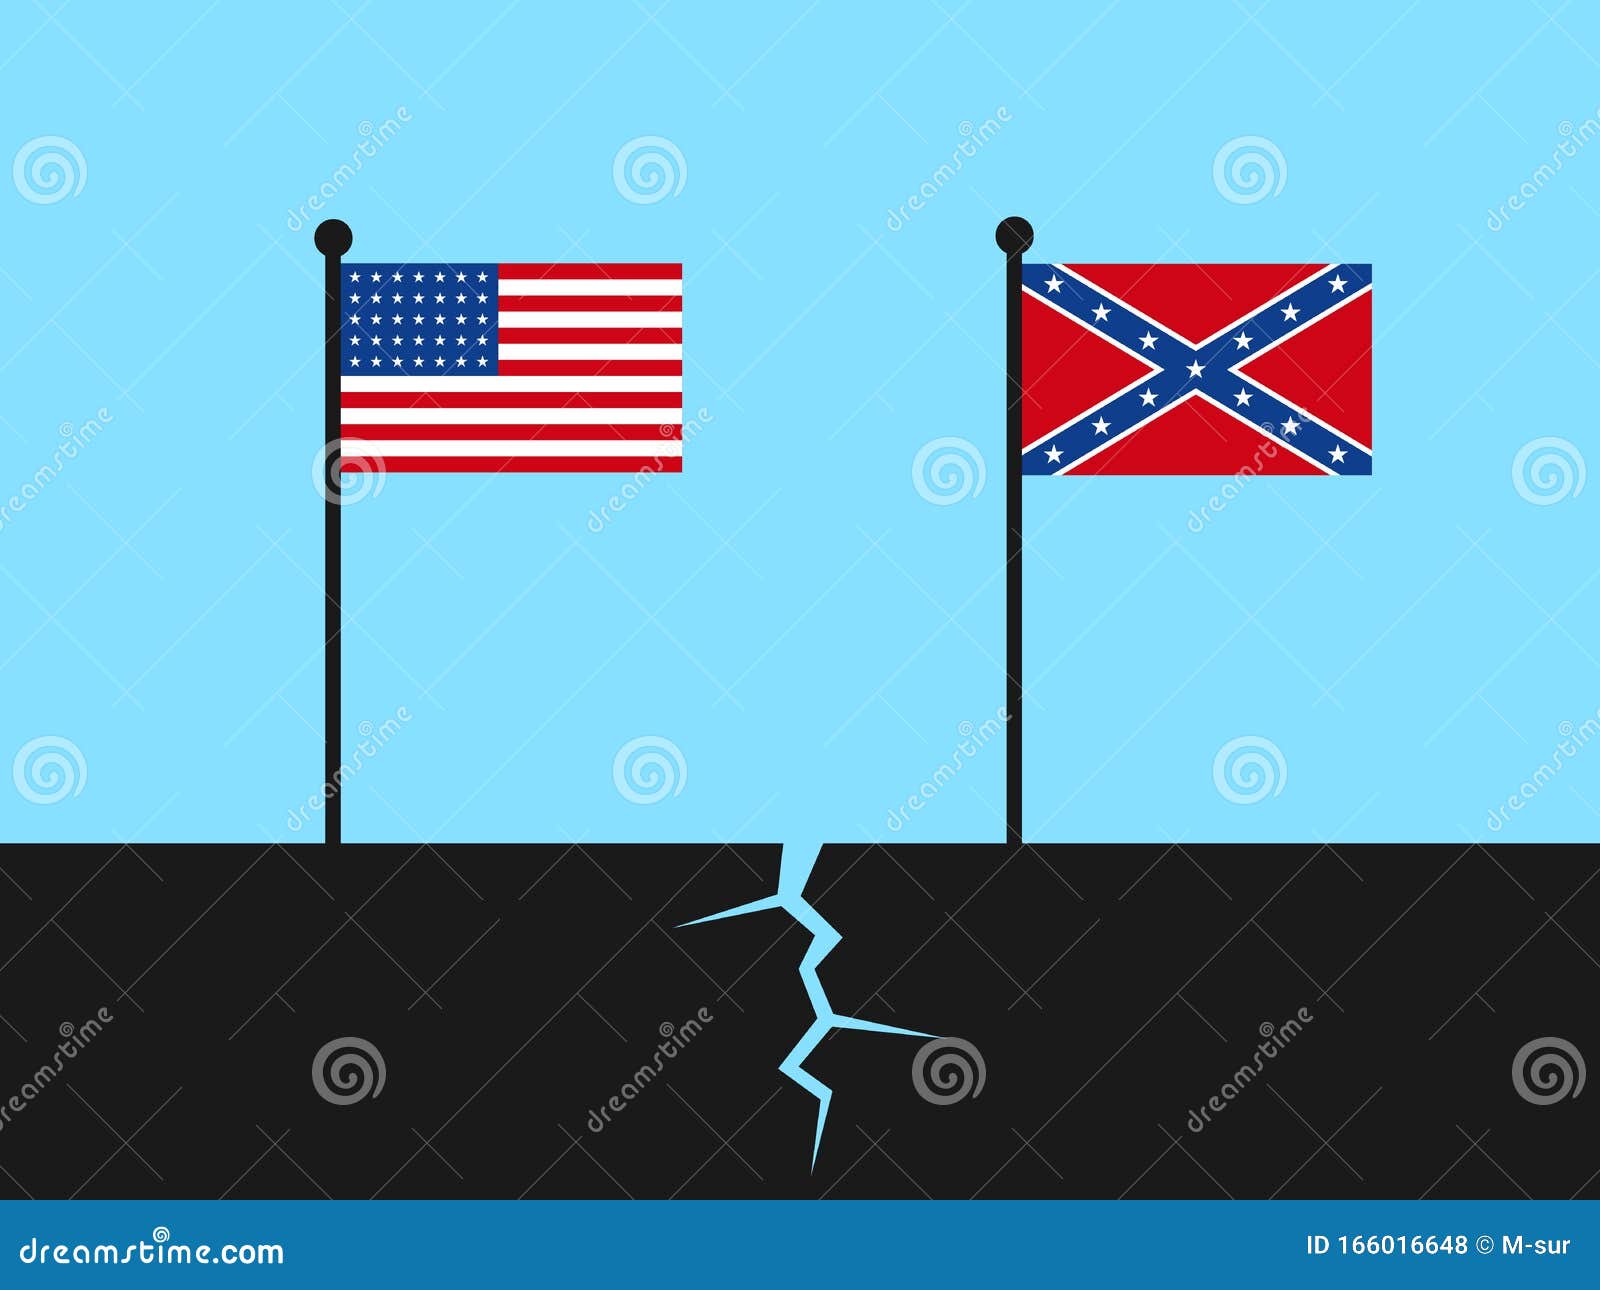 united states of america during american civil war - division into confederacy and union